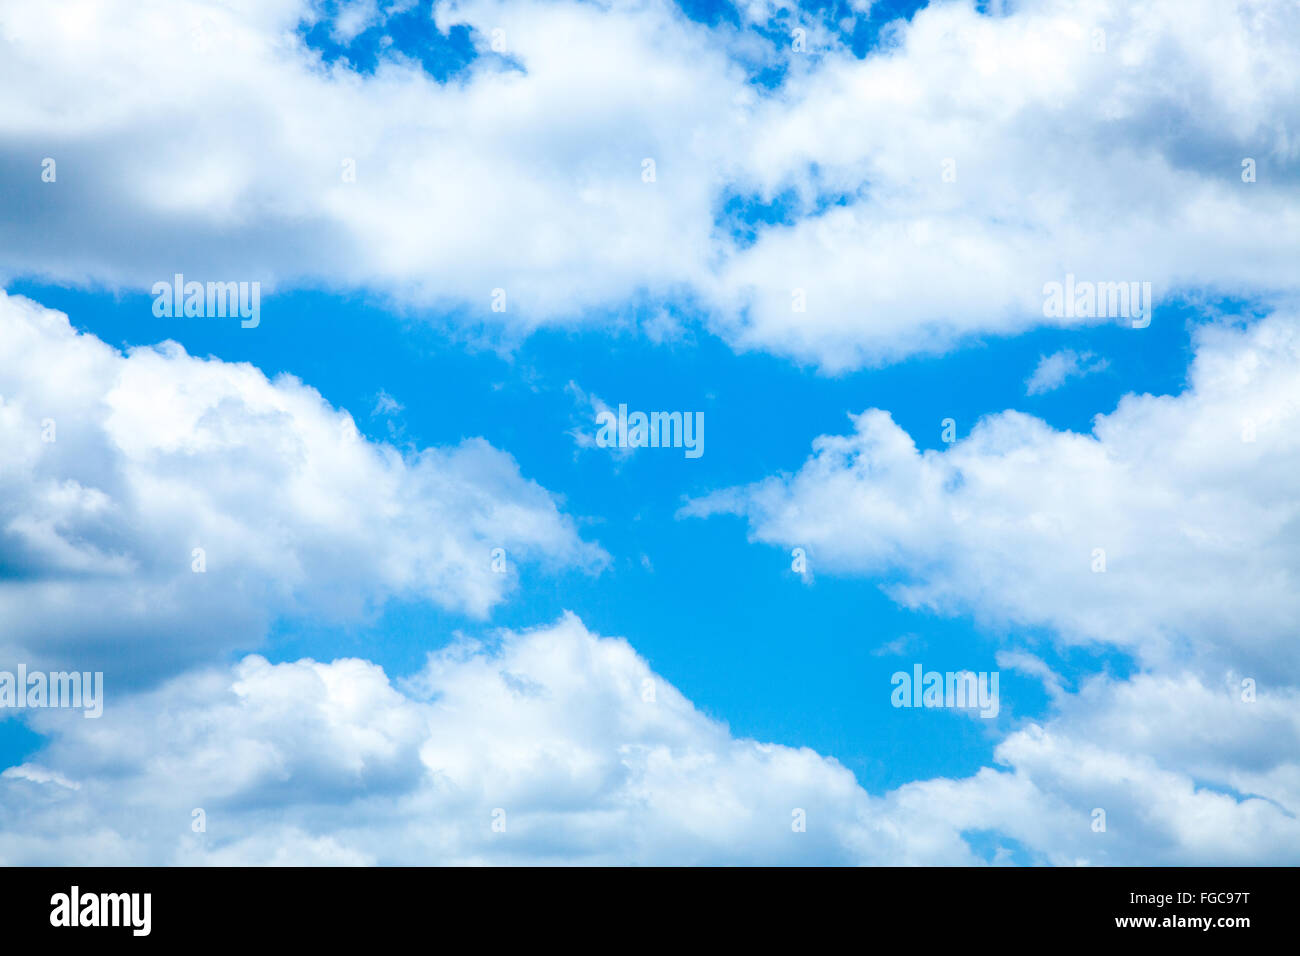 Blue Sky and White Clouds Background Cloudy Skies Texture Skyscape Pattern Stock Photo